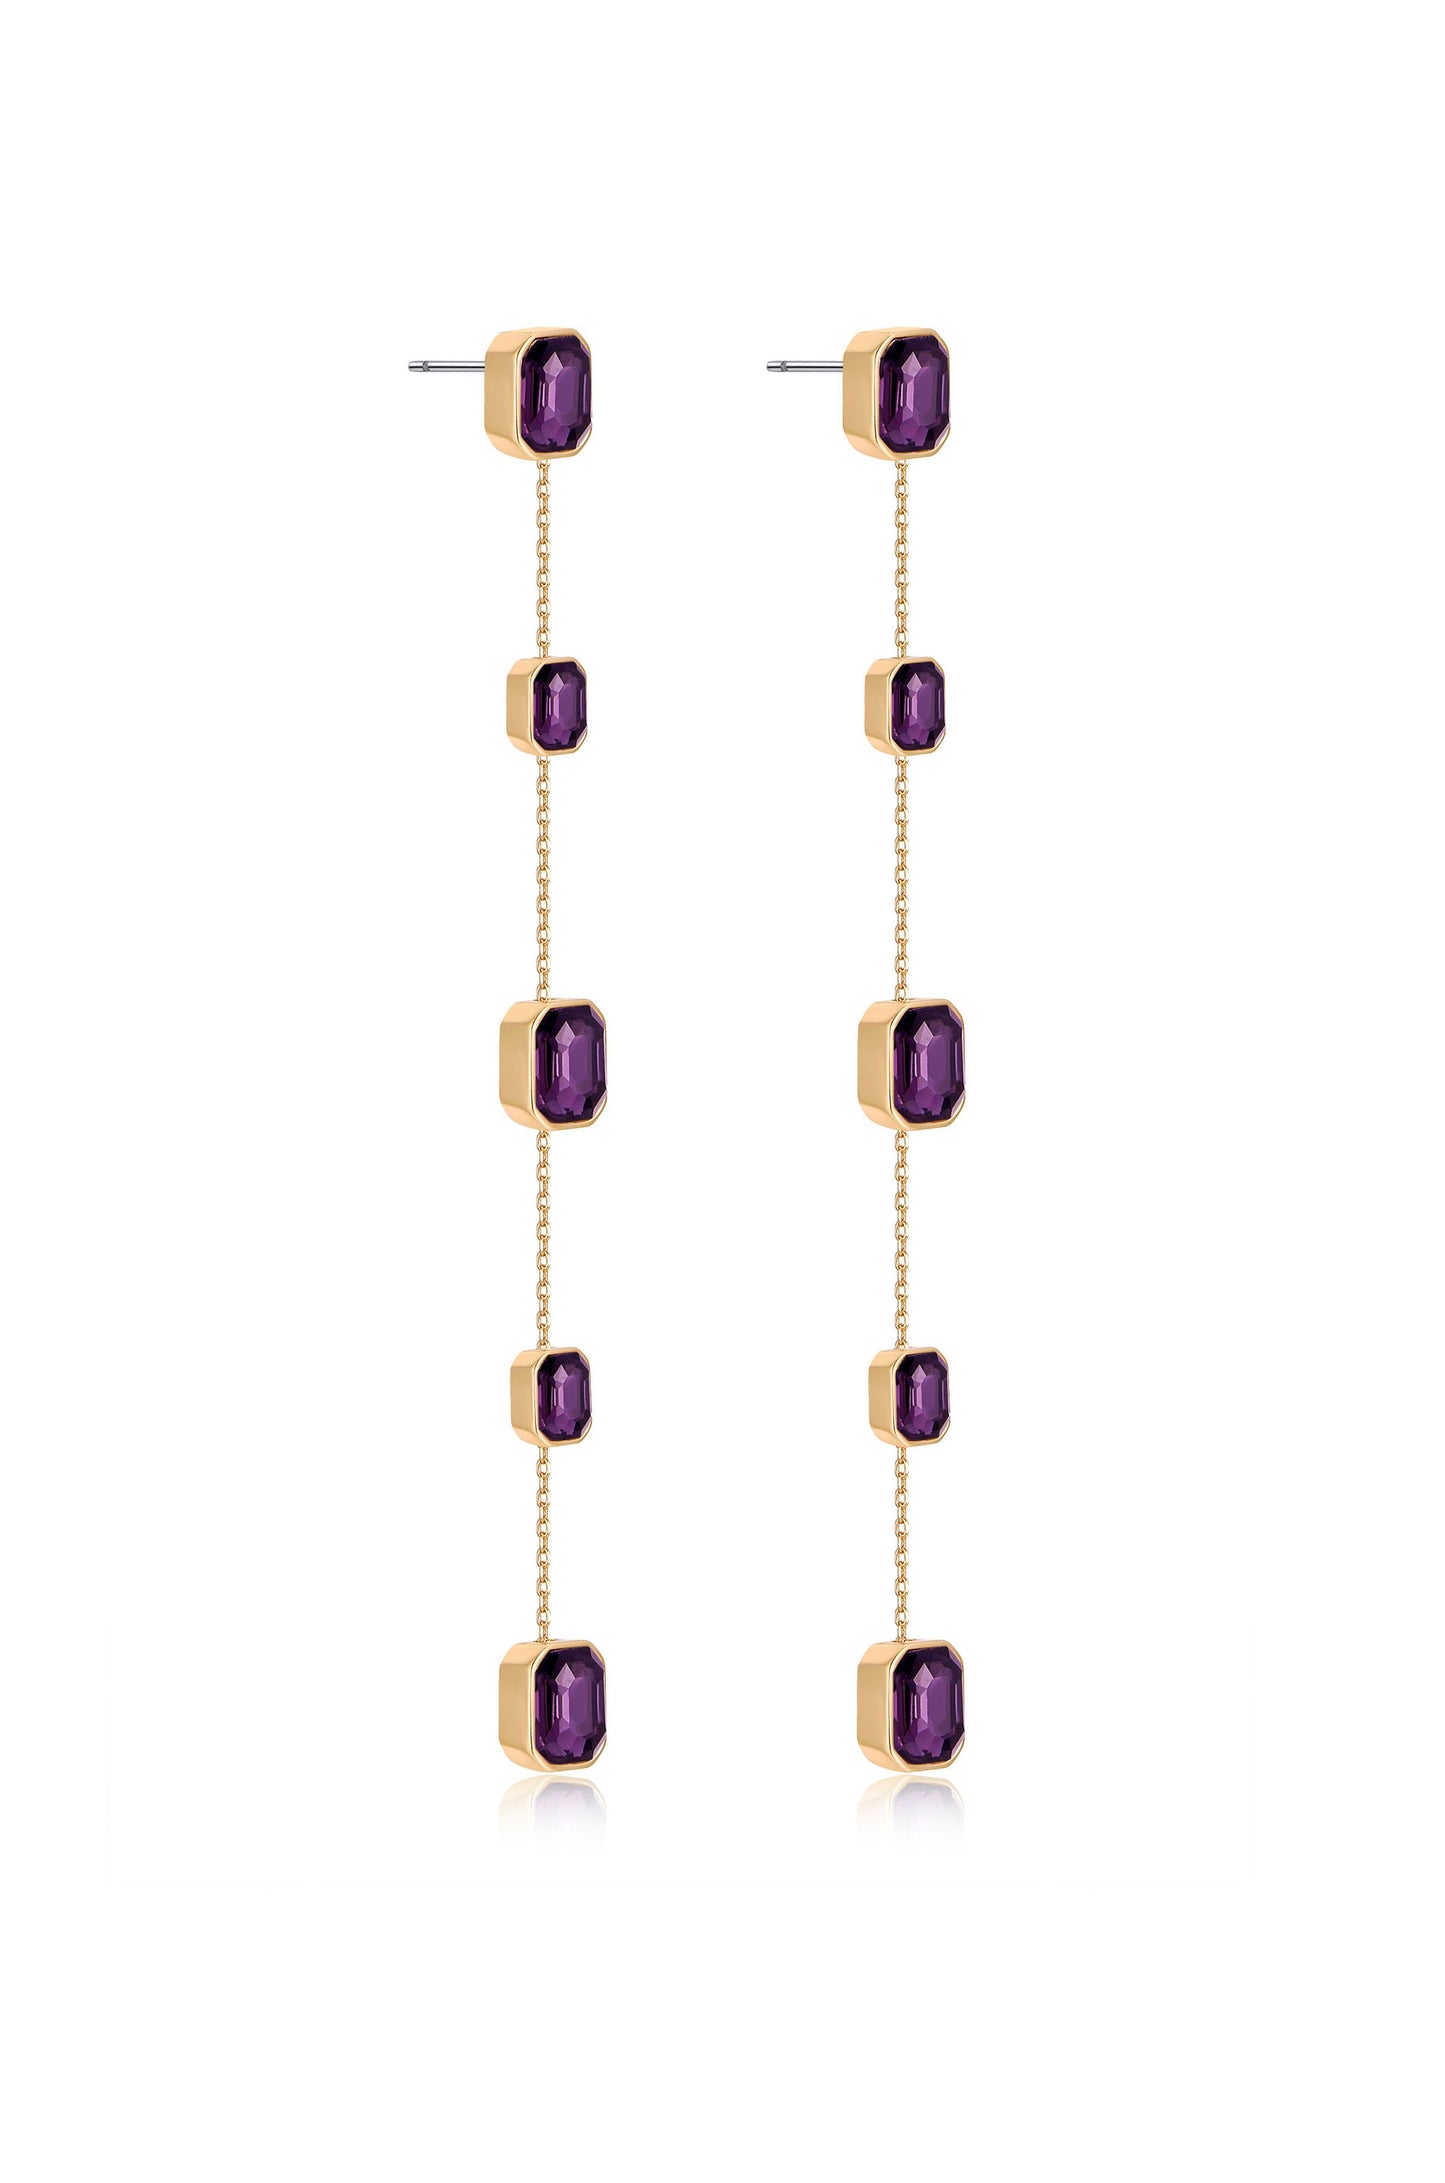 Iconic Crystal Dangle Earrings in amethyst crystals facing side